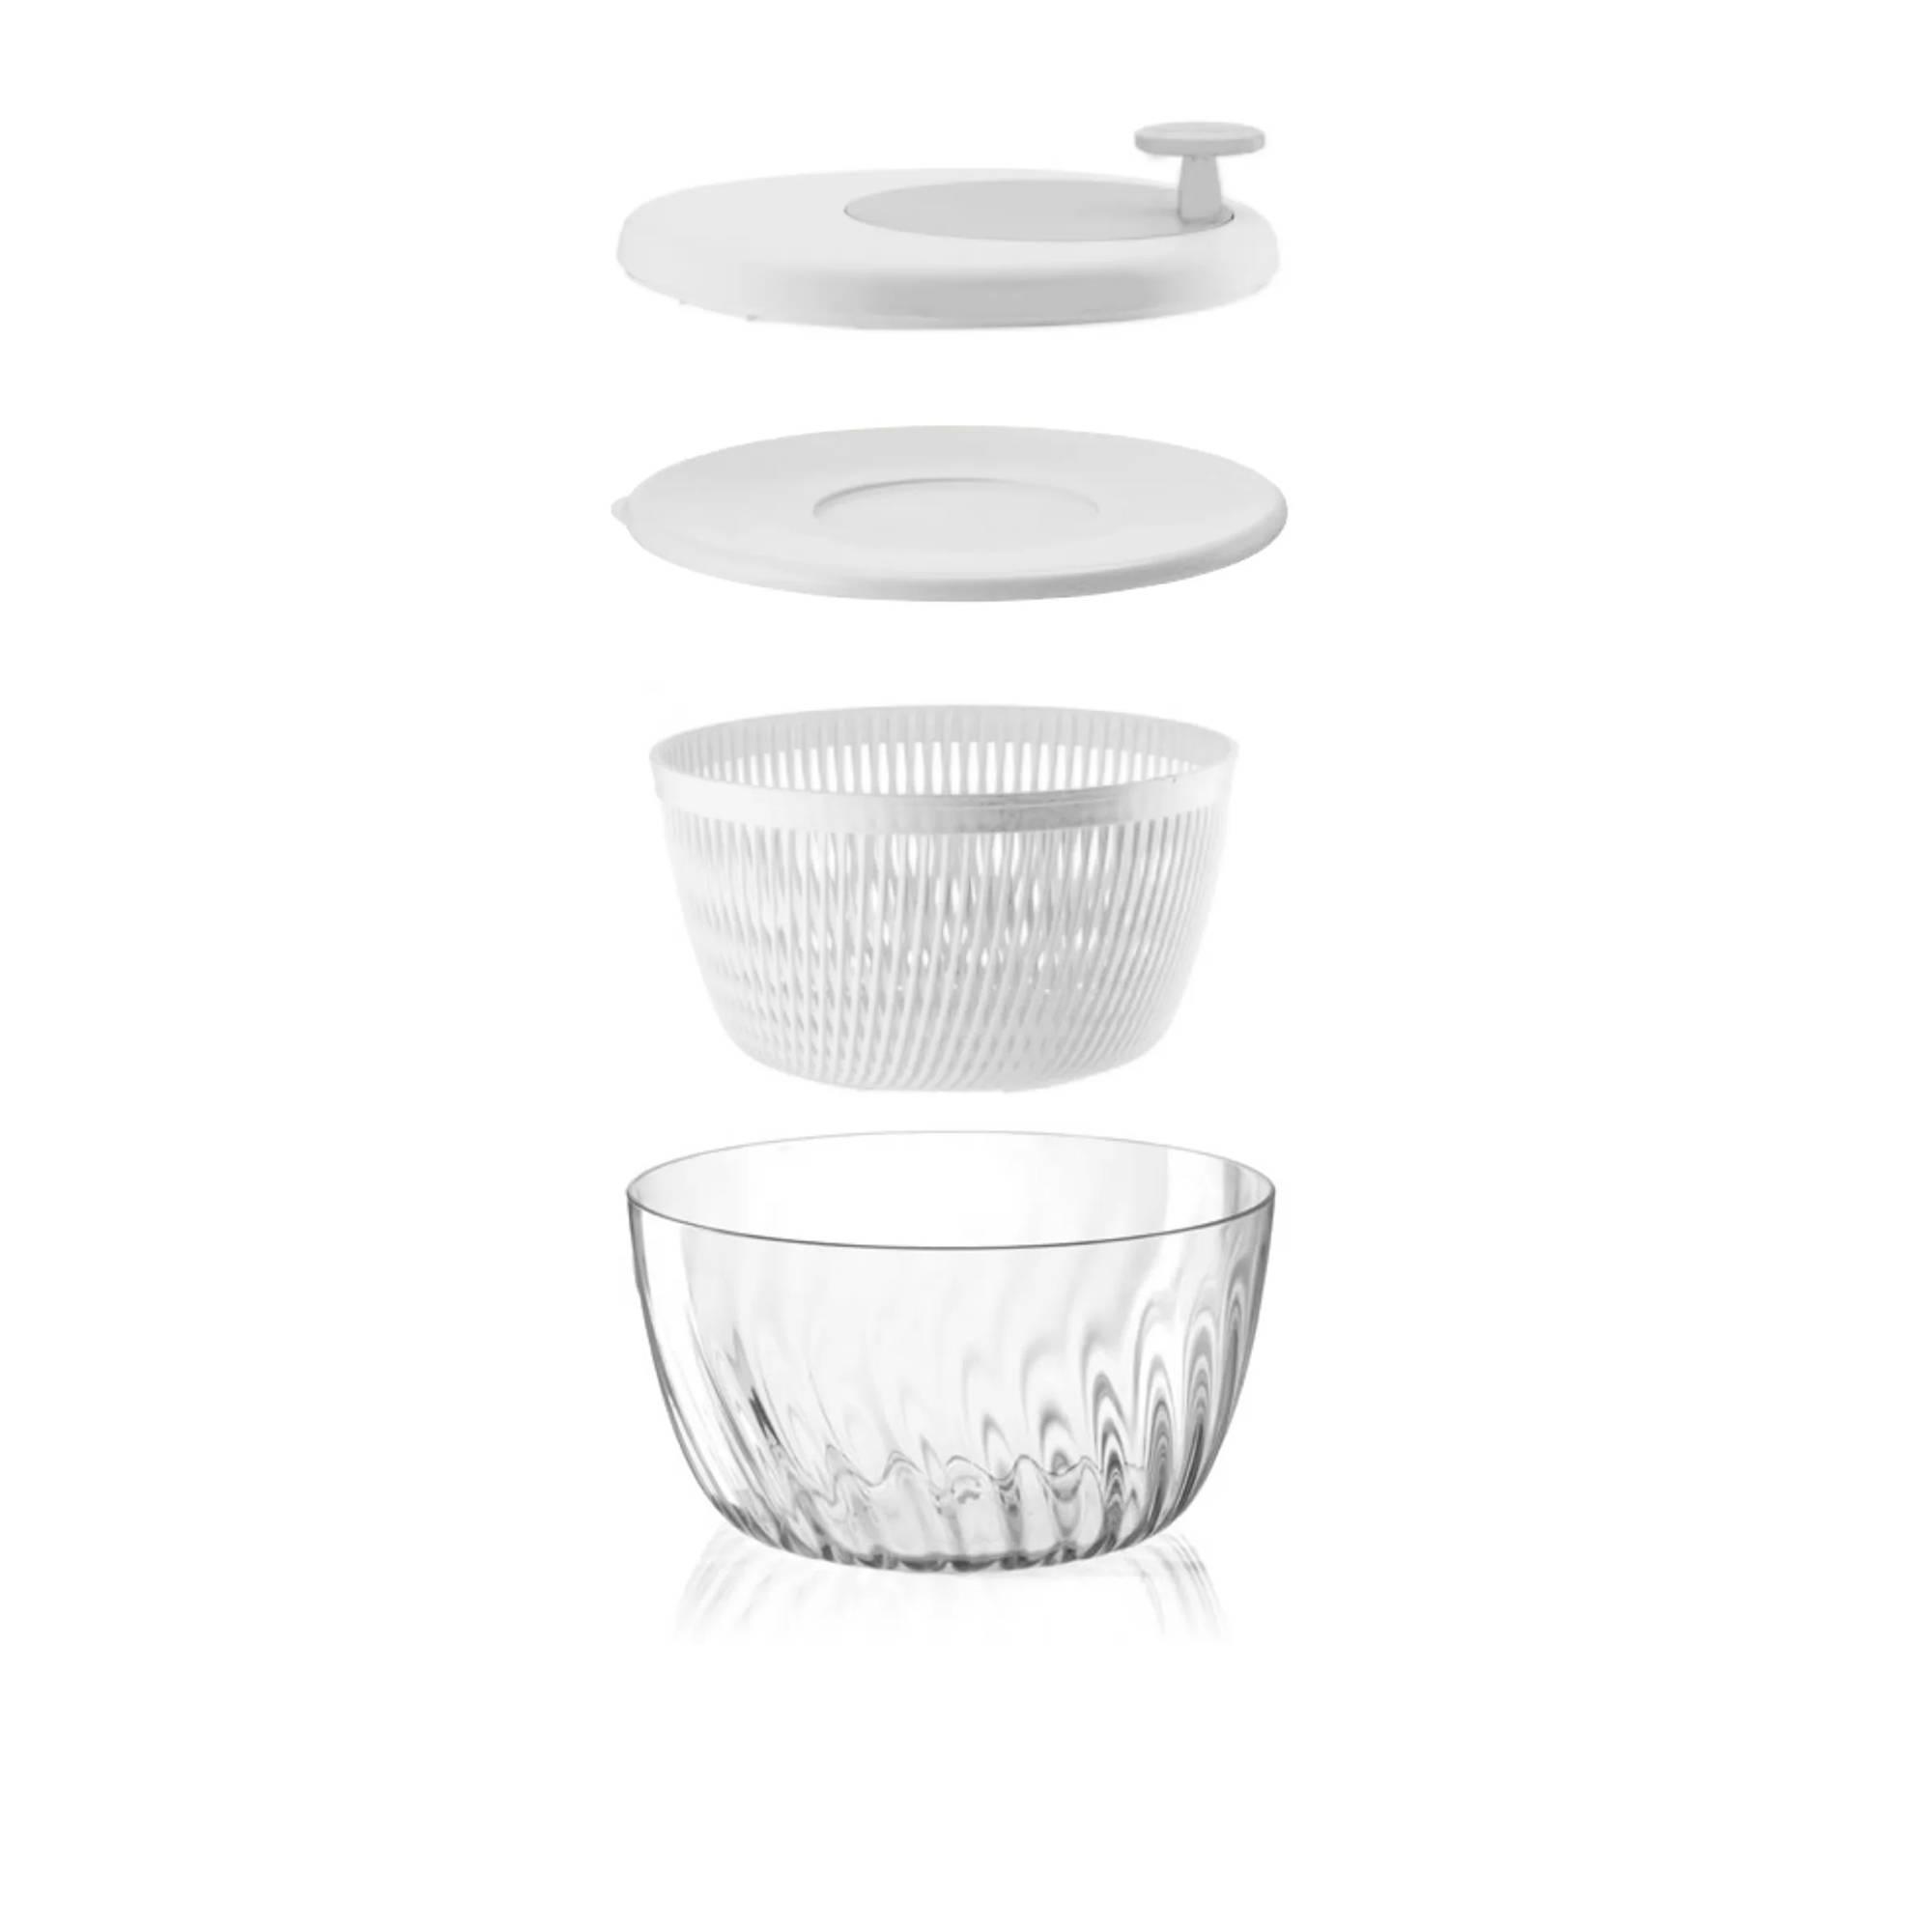 Guzzini Spin & Store Salad Spinner White Image 6